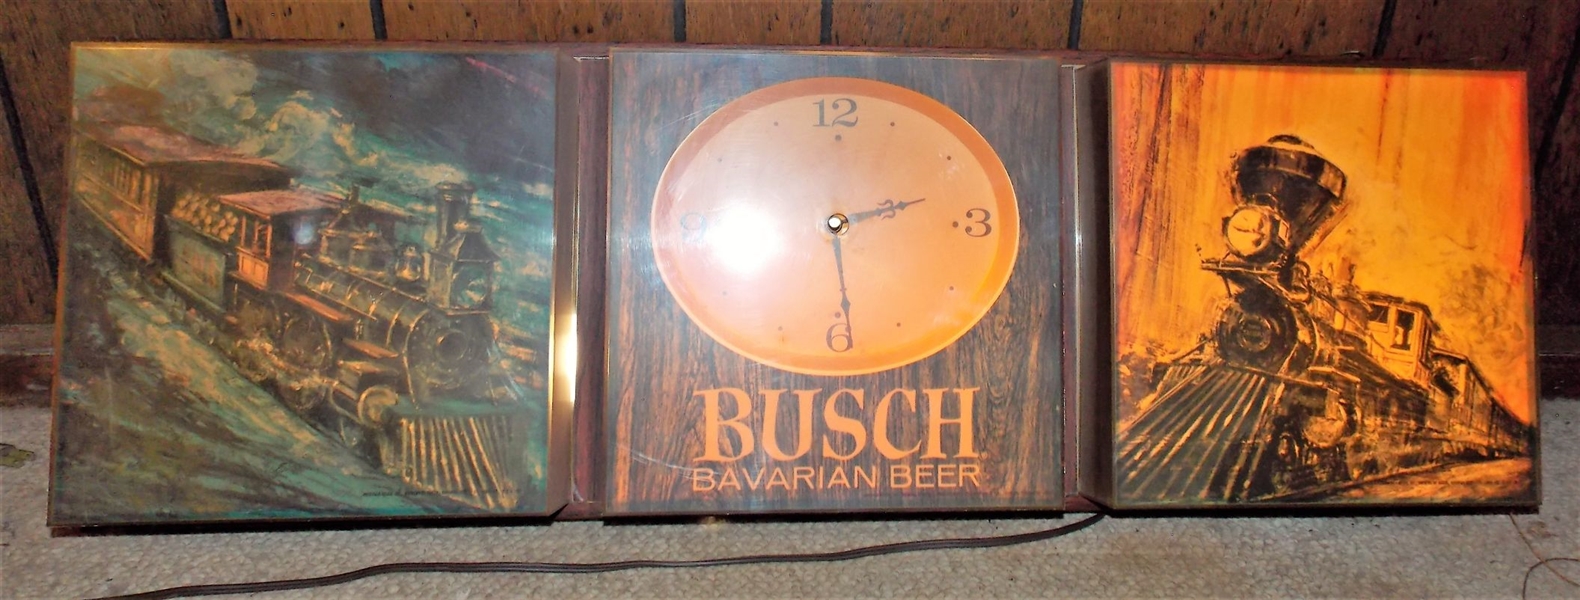 Busch Beer Clock Light Measures 36 1/2" by 12" - Some Discoloration to Dial - See Photos